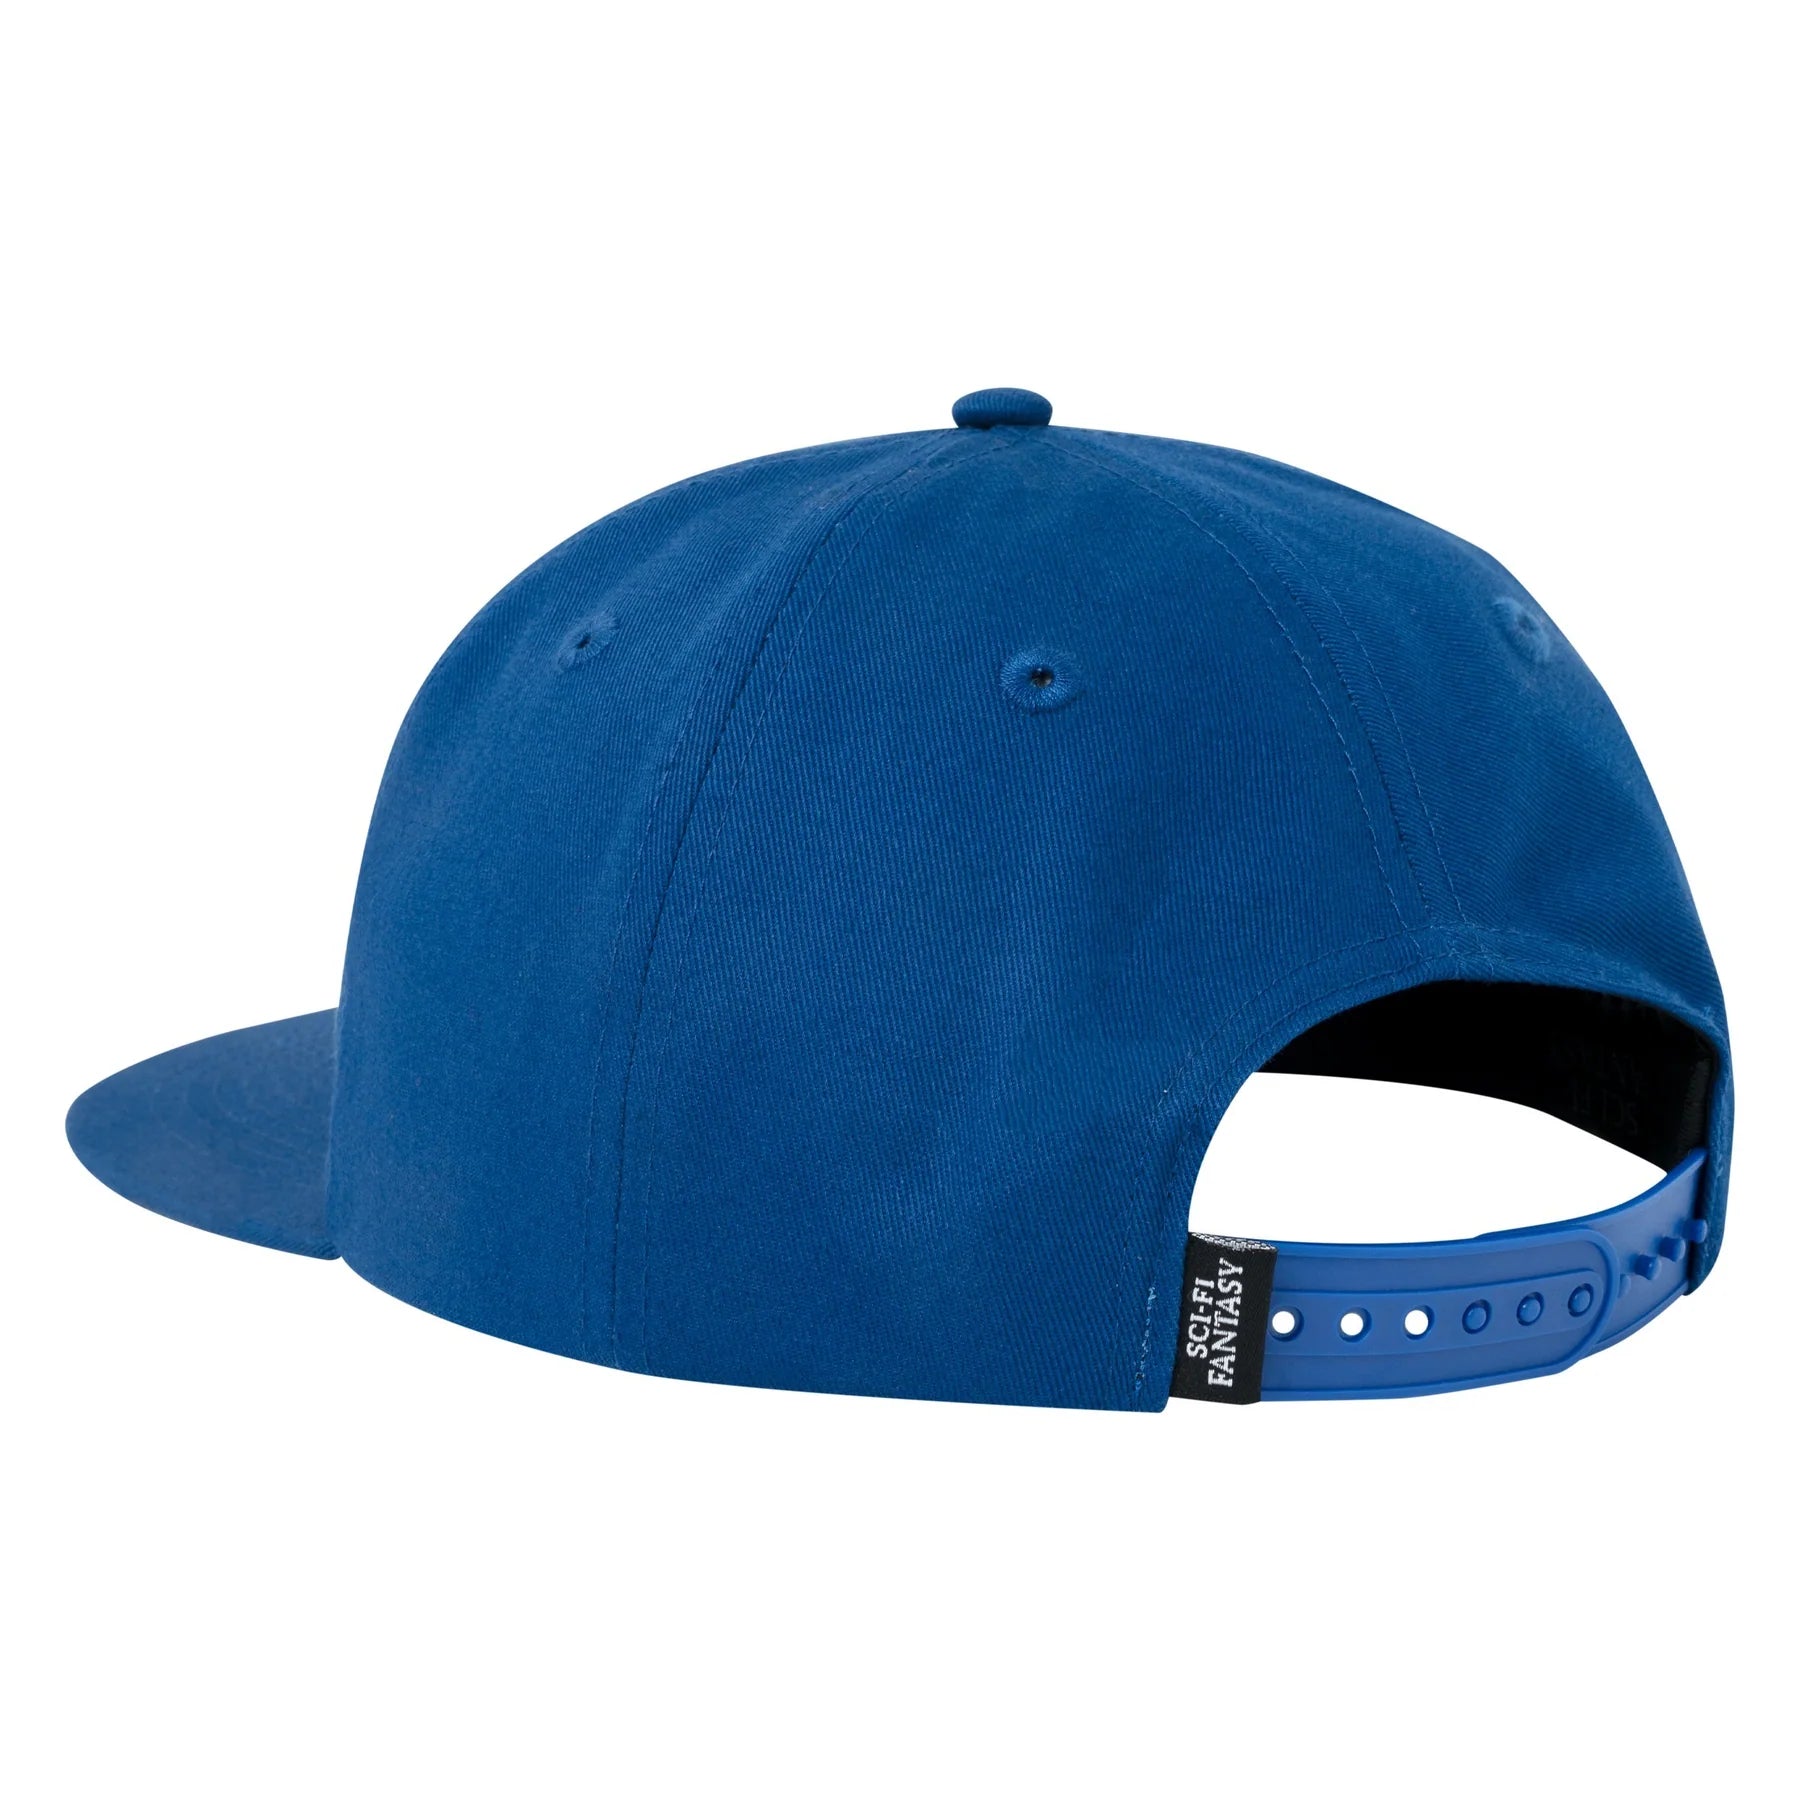 blue sci fi fantasy six panel cap with white logo on front. Free uk shipping on orders over £50